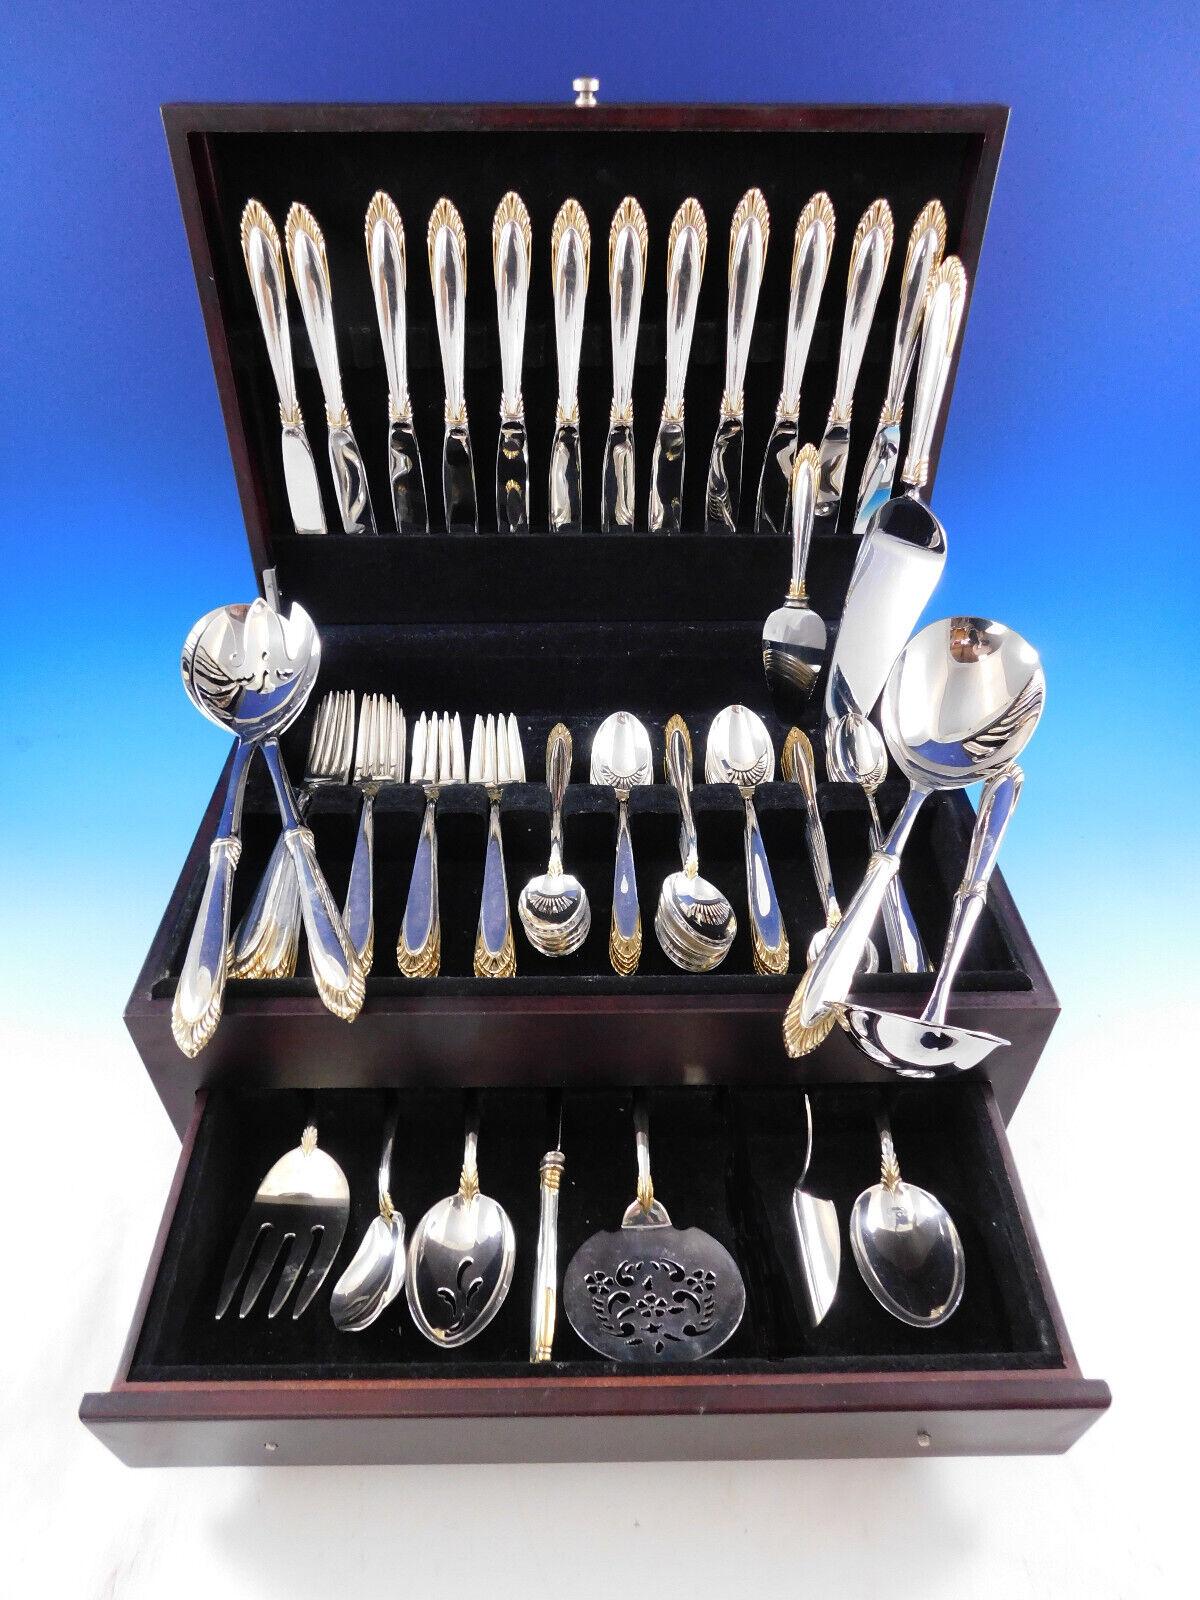 Scarce Golden Soliel by Lunt c1995 sterling silver with gold accent Flatware set, 86 pieces. This set includes:

12 Knives, 9 1/8